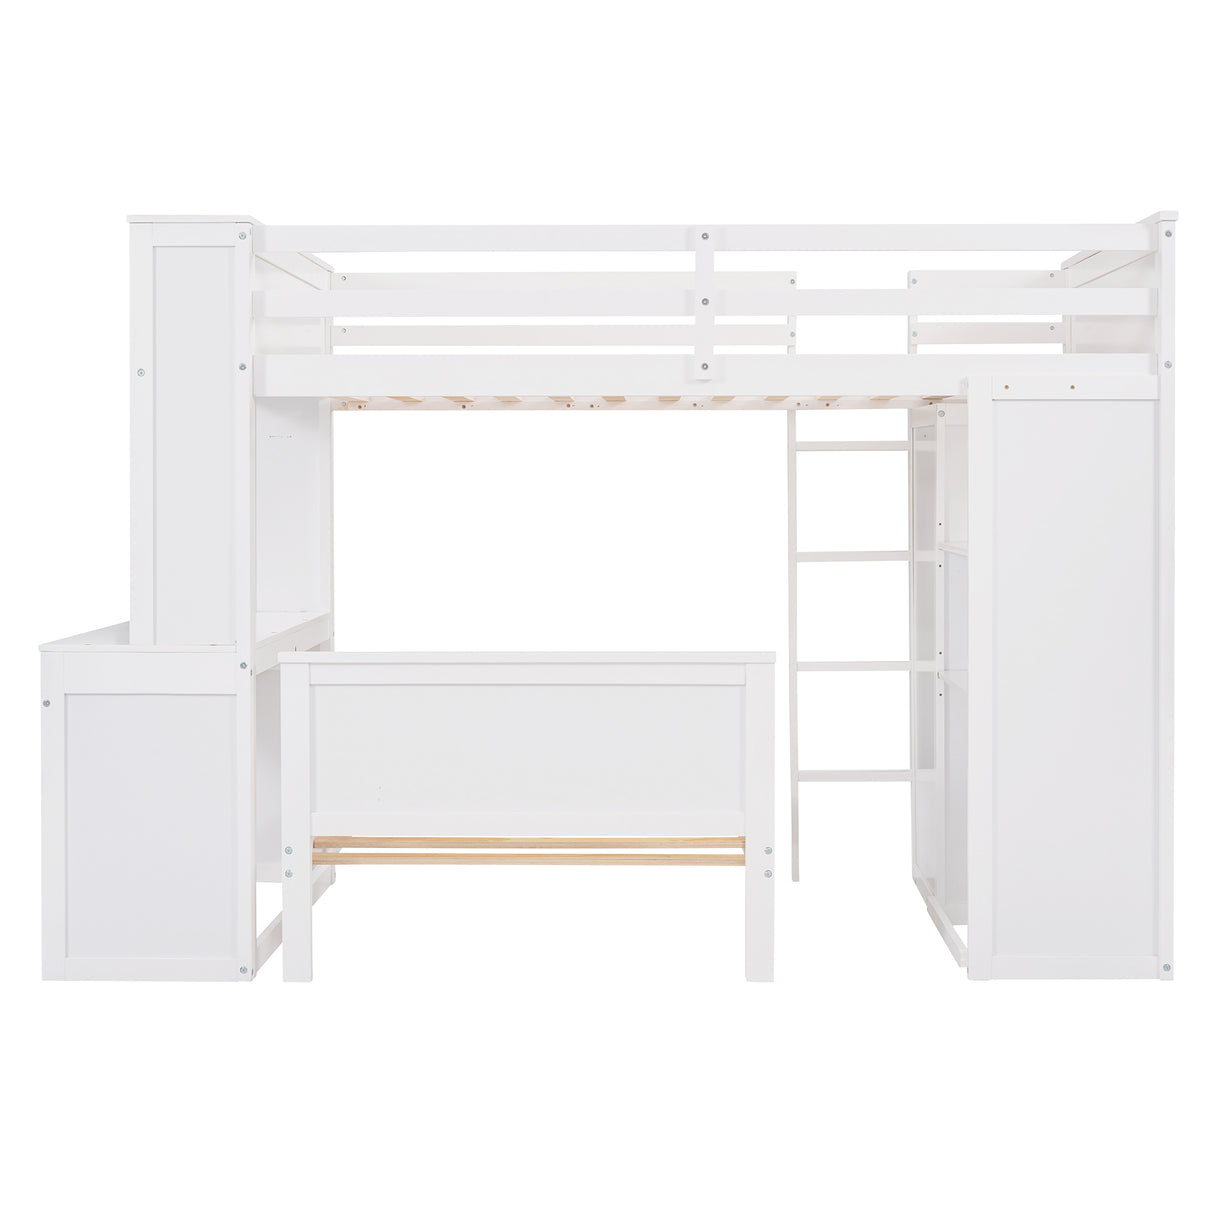 Twin size Loft Bed with a Stand-alone bed, Shelves,Desk,and Wardrobe-White - Home Elegance USA